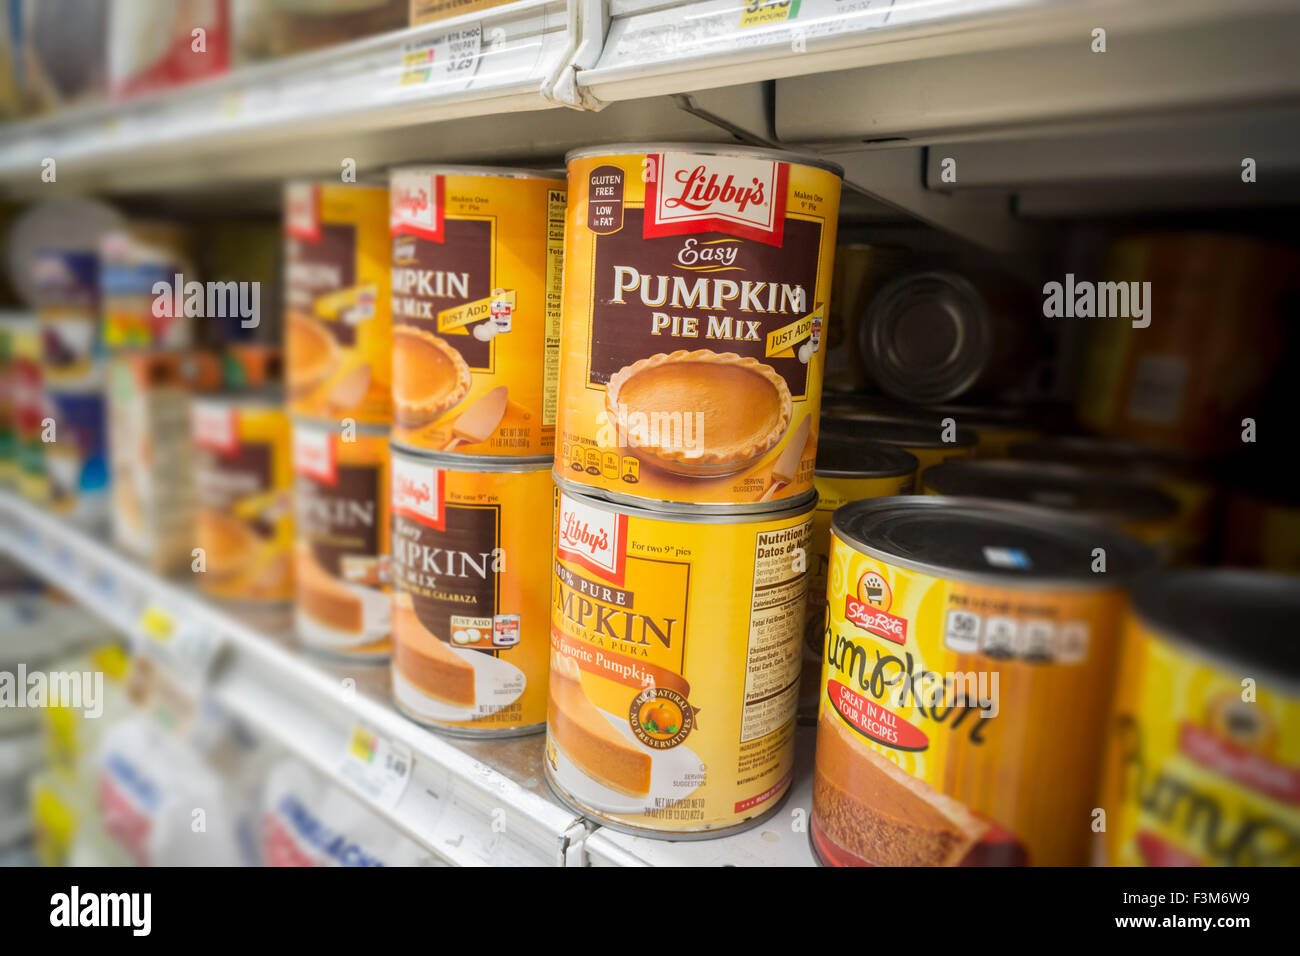 Cans of Libby's Pumpkin Pie mix and fillings on the shelves of a supermarket in New York on Thursday, October 8, 2015. Because of a record rainfall in Illinois the pumpkin harvest is off by about one-third. Illinois provides almost 90% of al the pumpkins canned. (© Richard B. Levine) Stock Photo